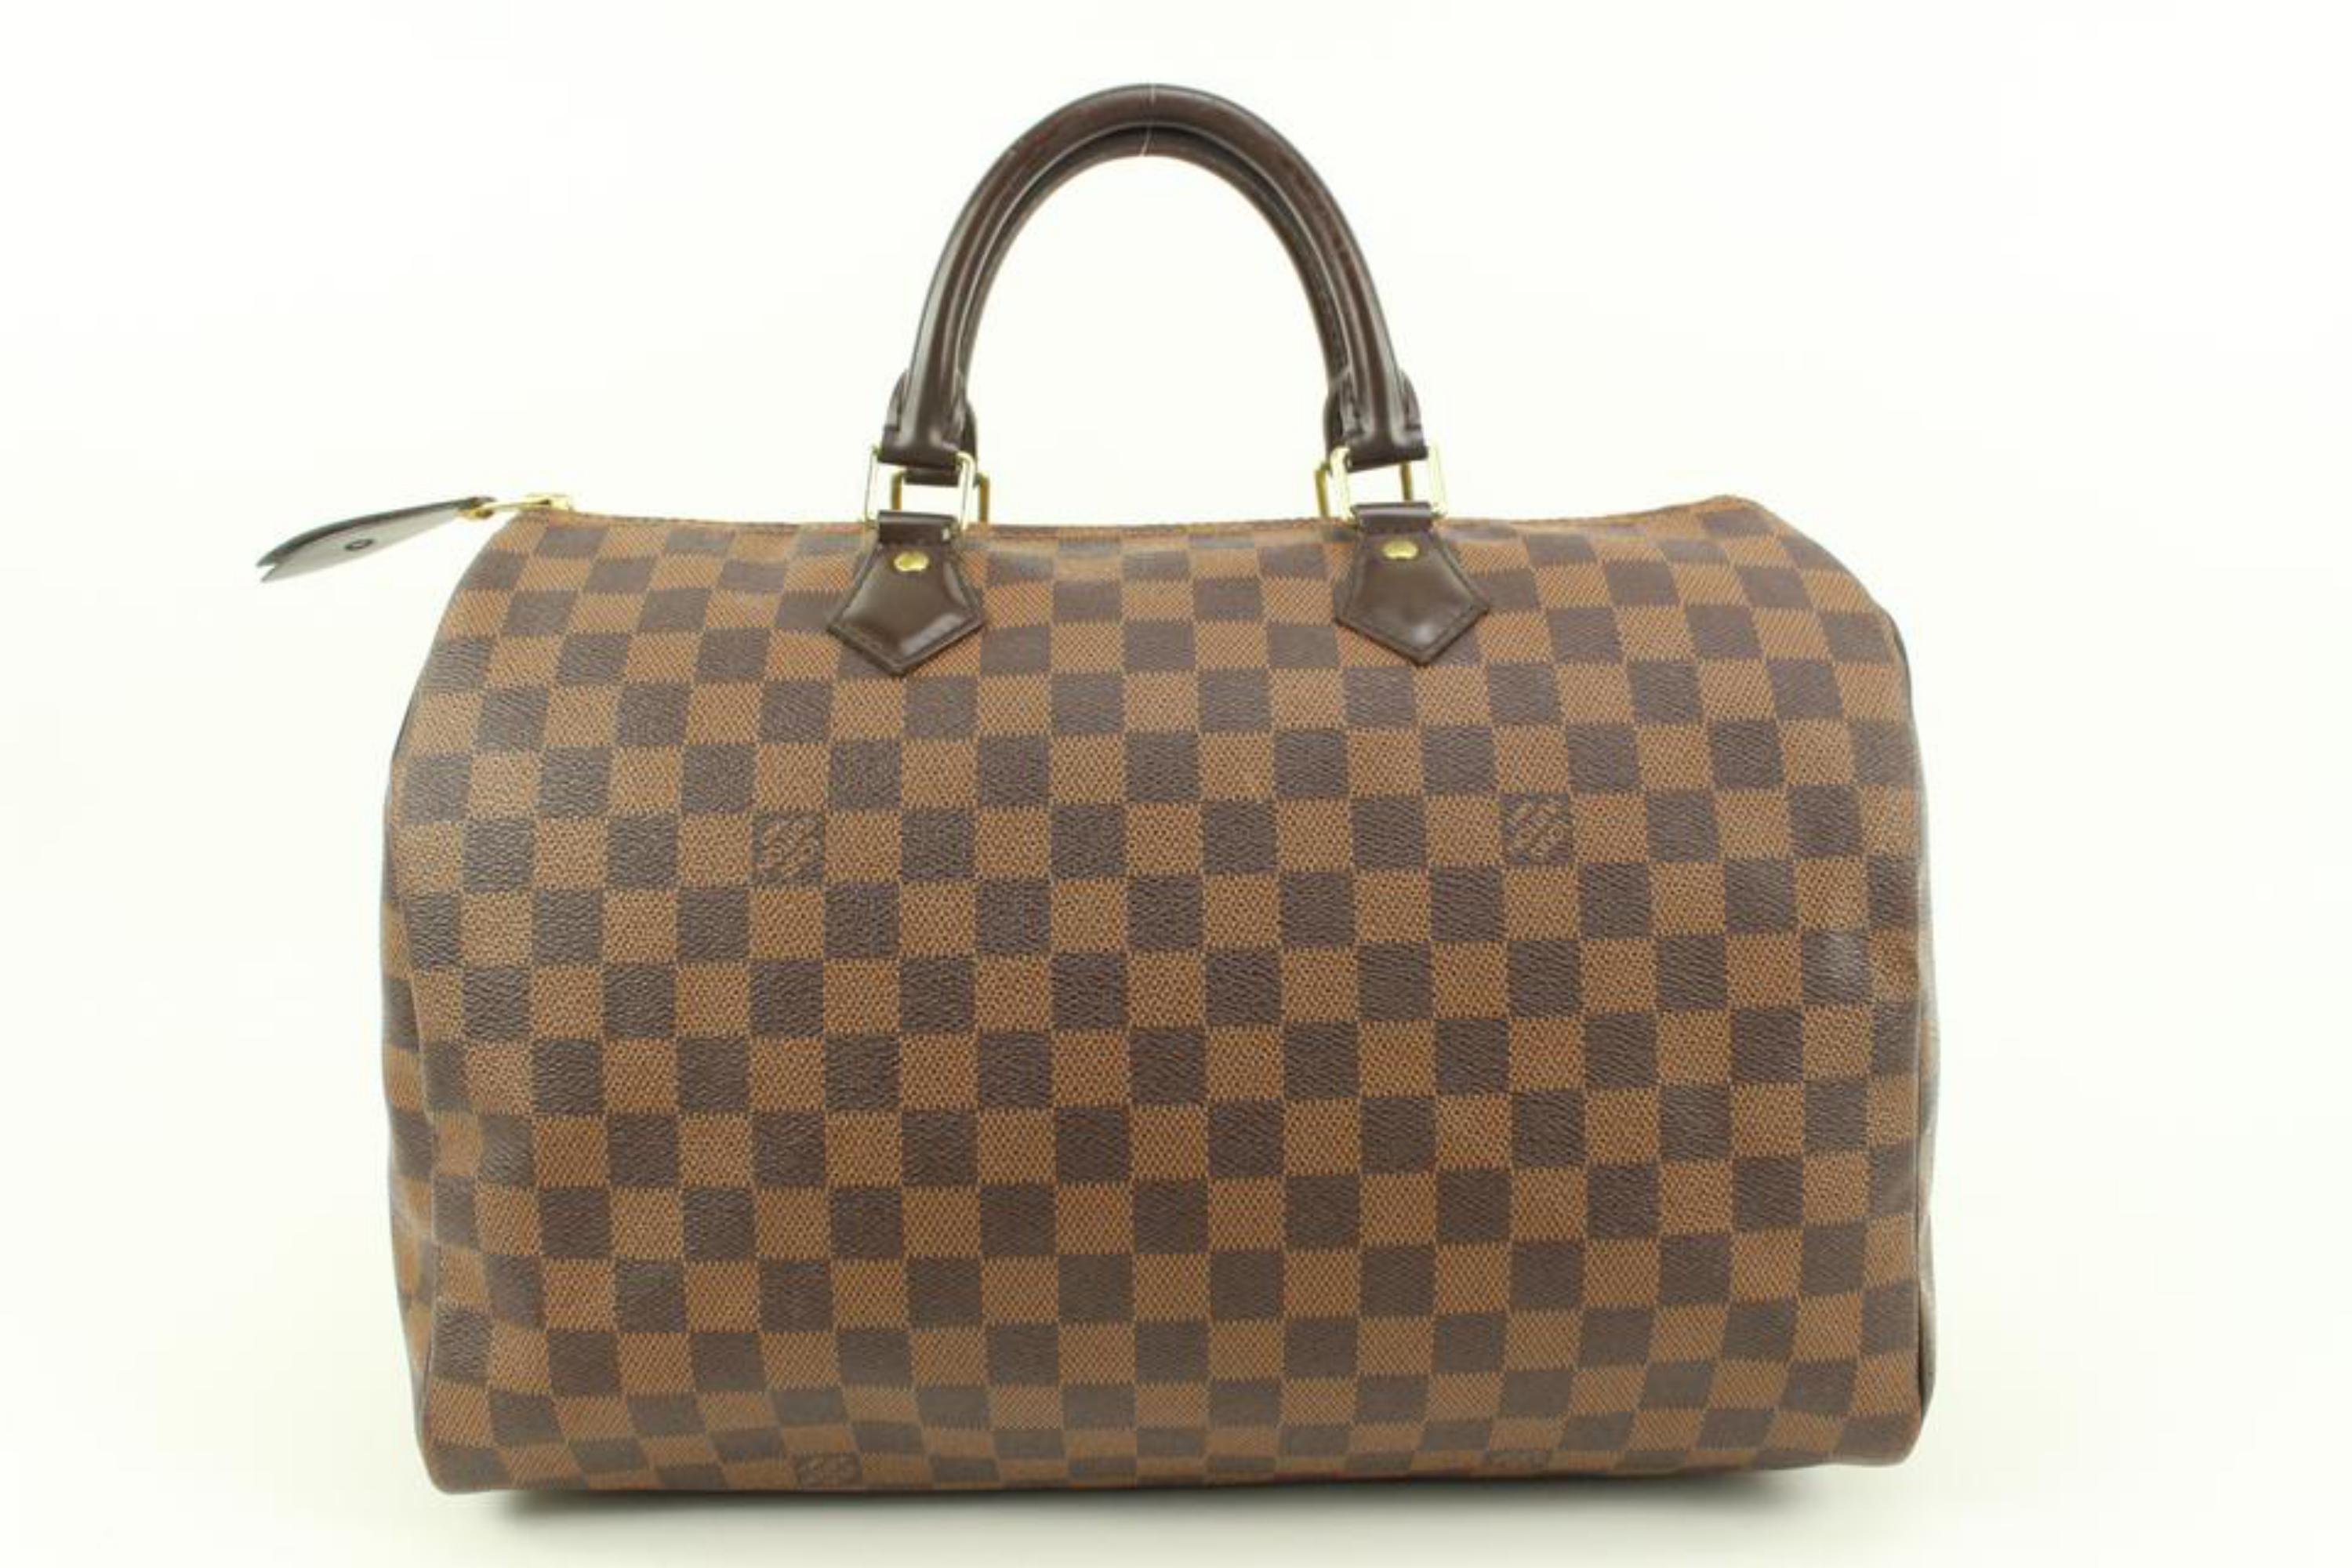 Louis Vuitton Large Damier Ebene Speedy 35 Boston Bag GM 84lk33s In Good Condition For Sale In Dix hills, NY